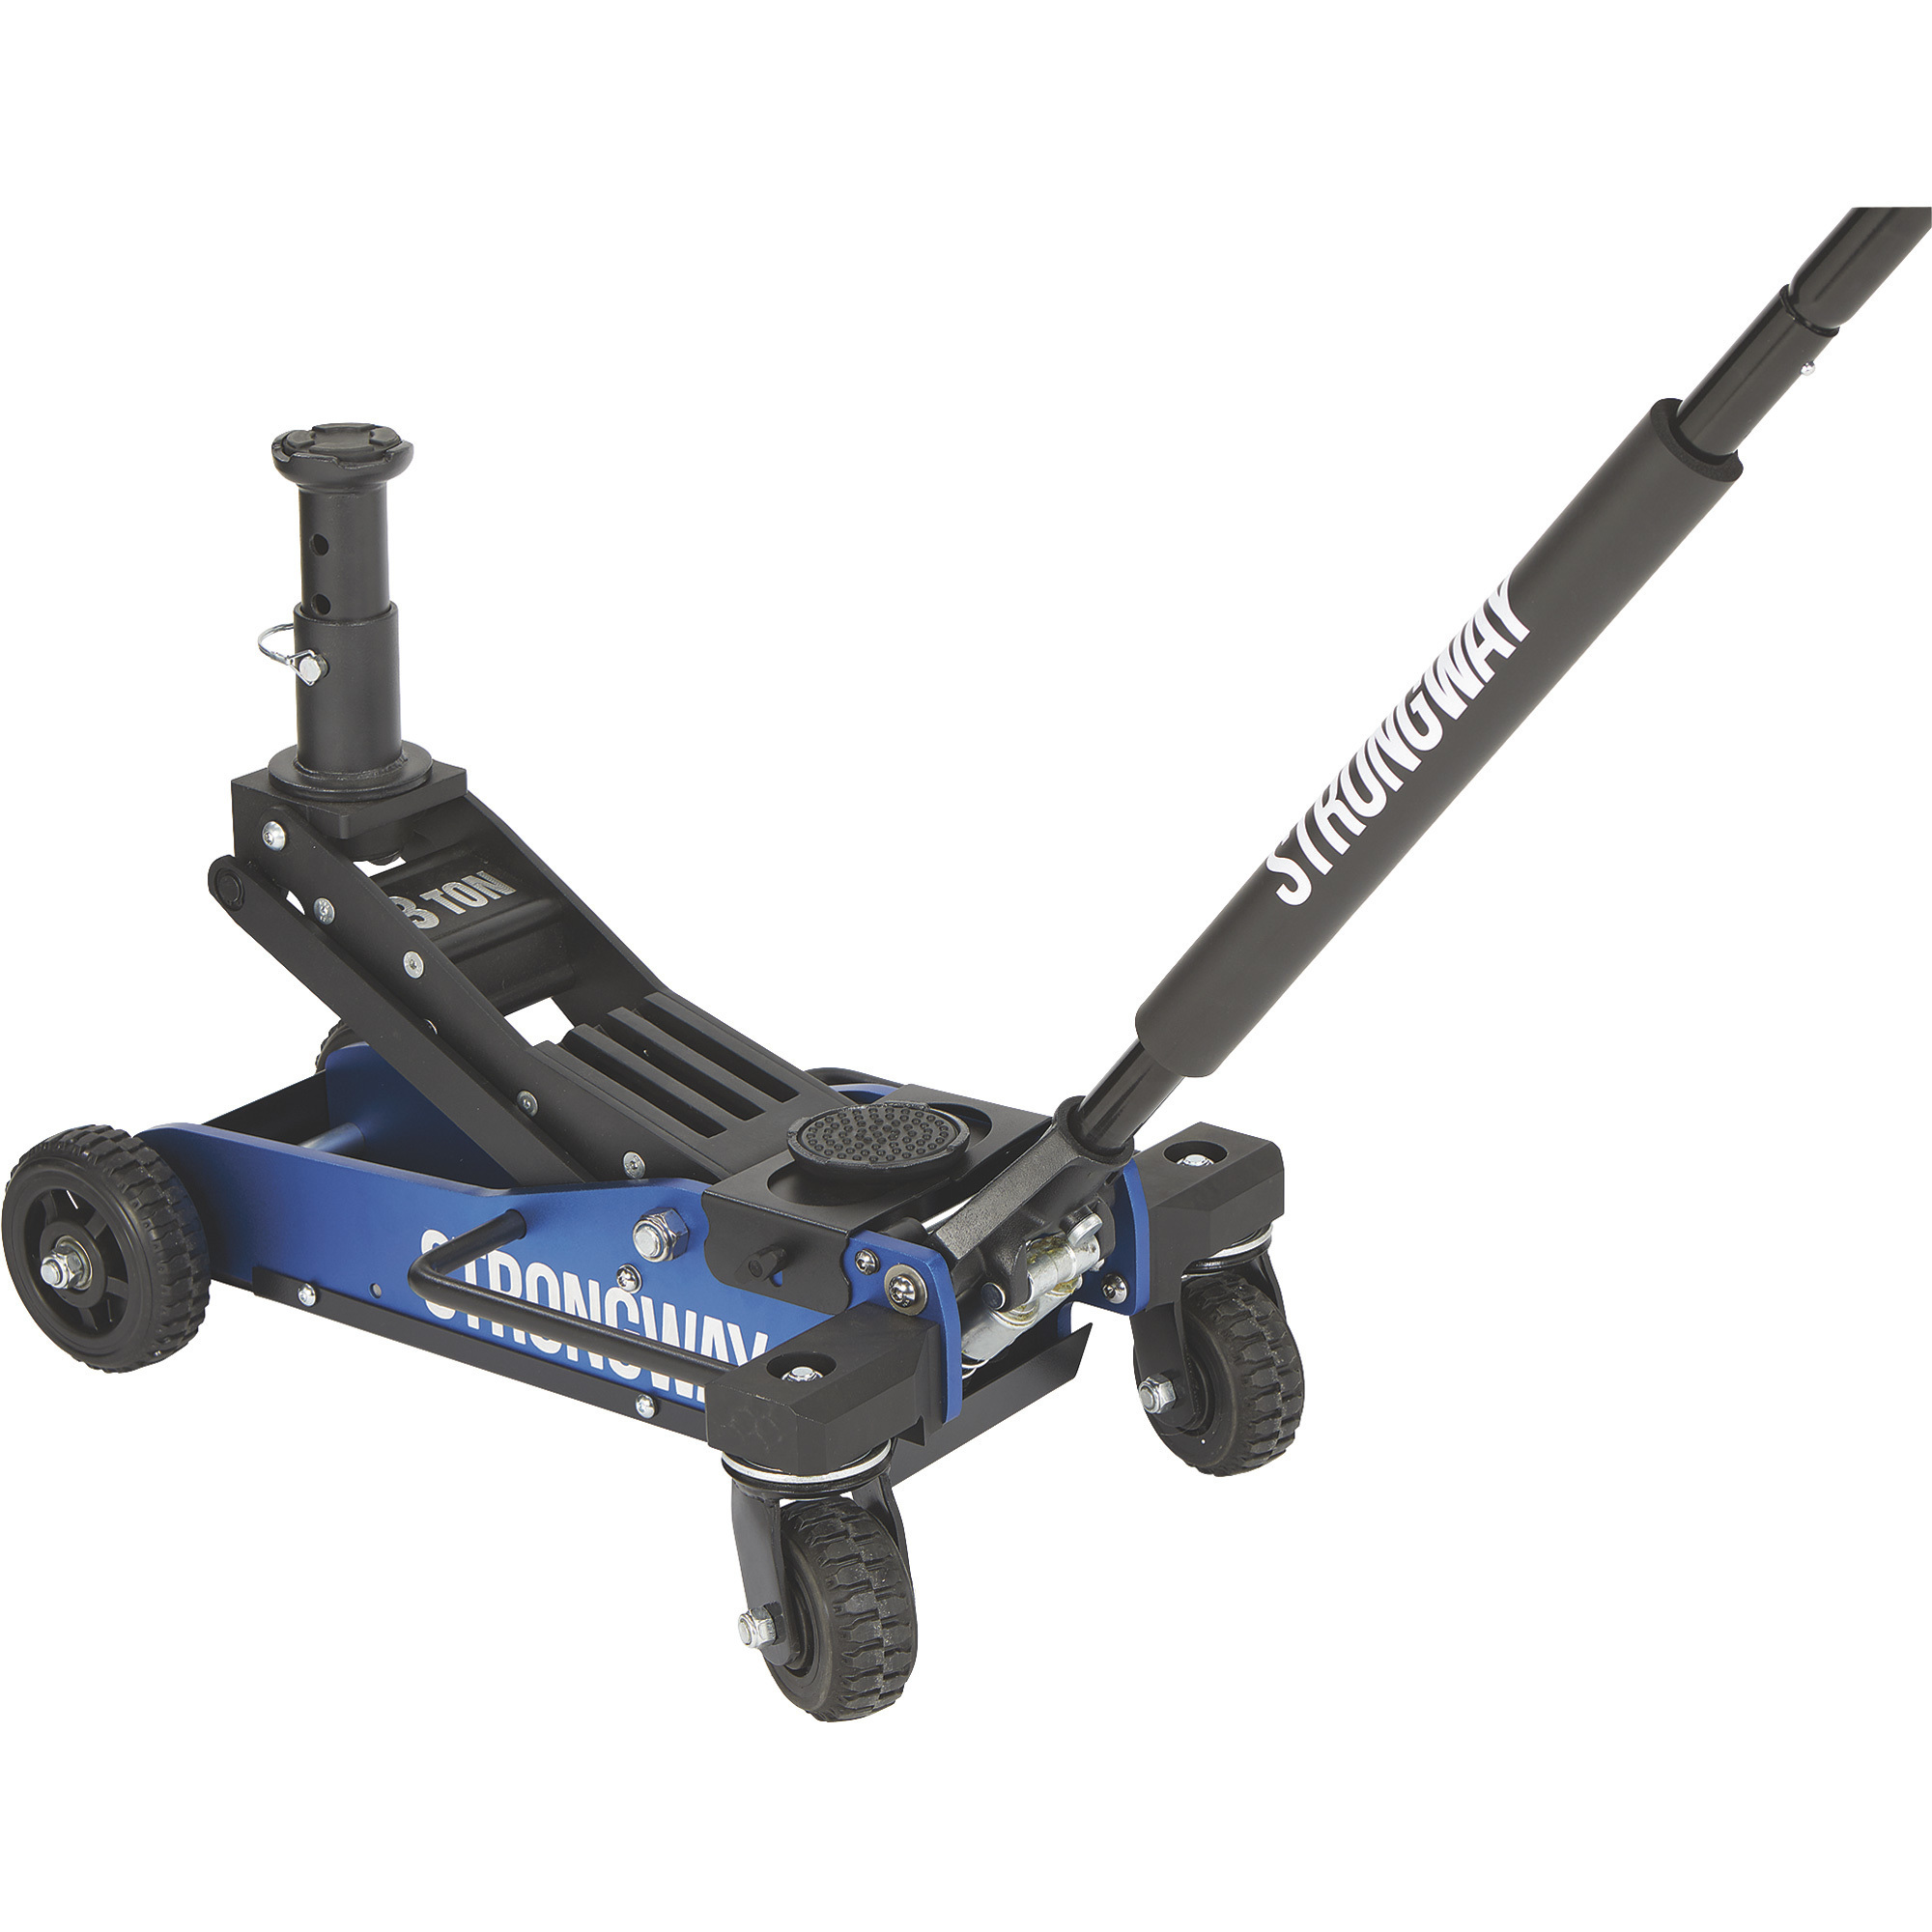 Strongway Off-Road Jack, 3-Ton Capacity, 29Inch Lift Height, Aluminum, Professional Grade